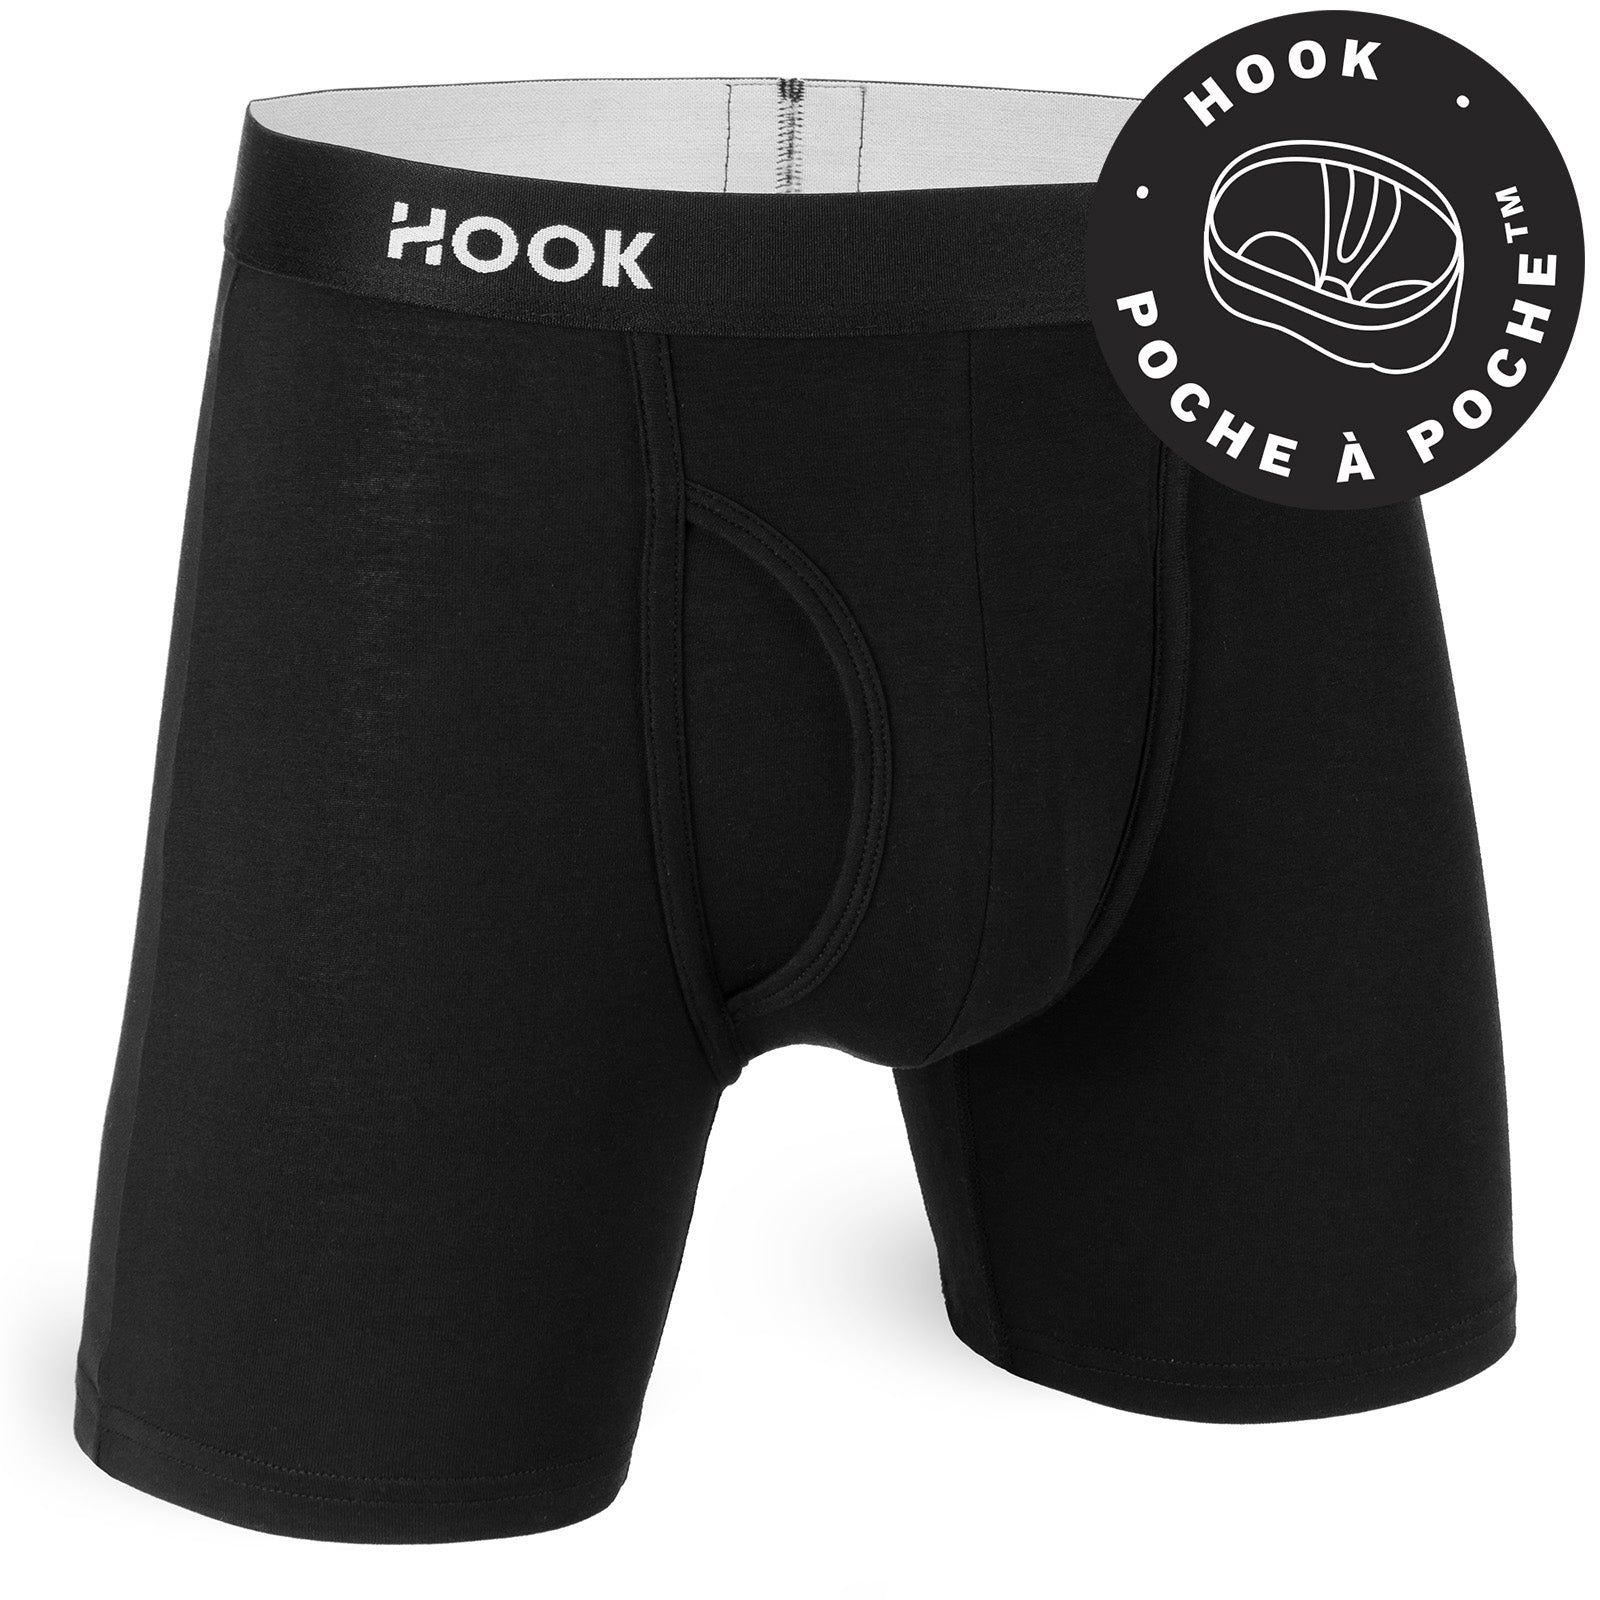 Fly Boxer Brief : Black 5 Pack